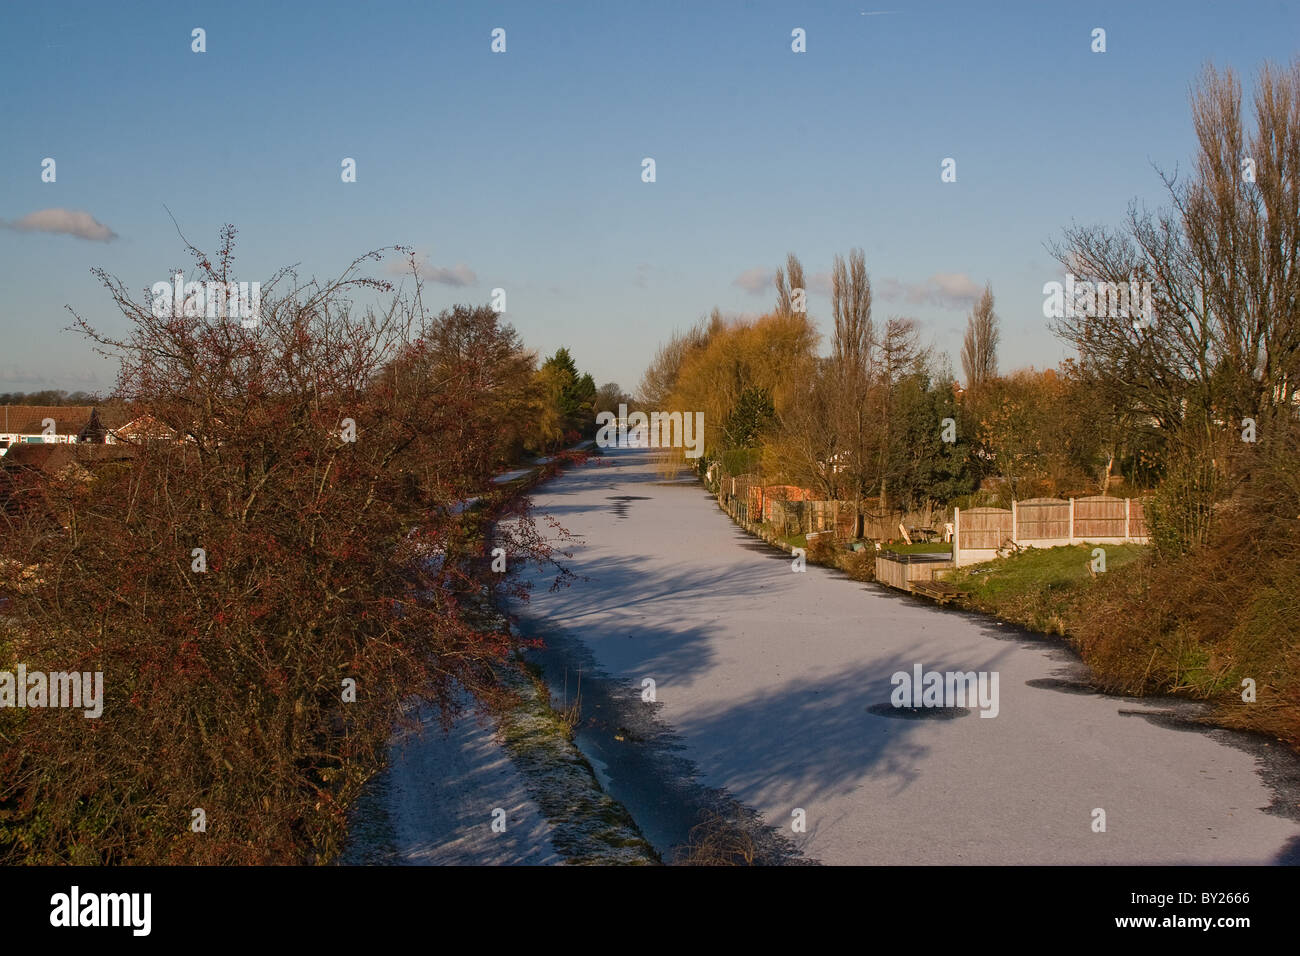 Canale Leeds-Liverpool in inverno Foto Stock